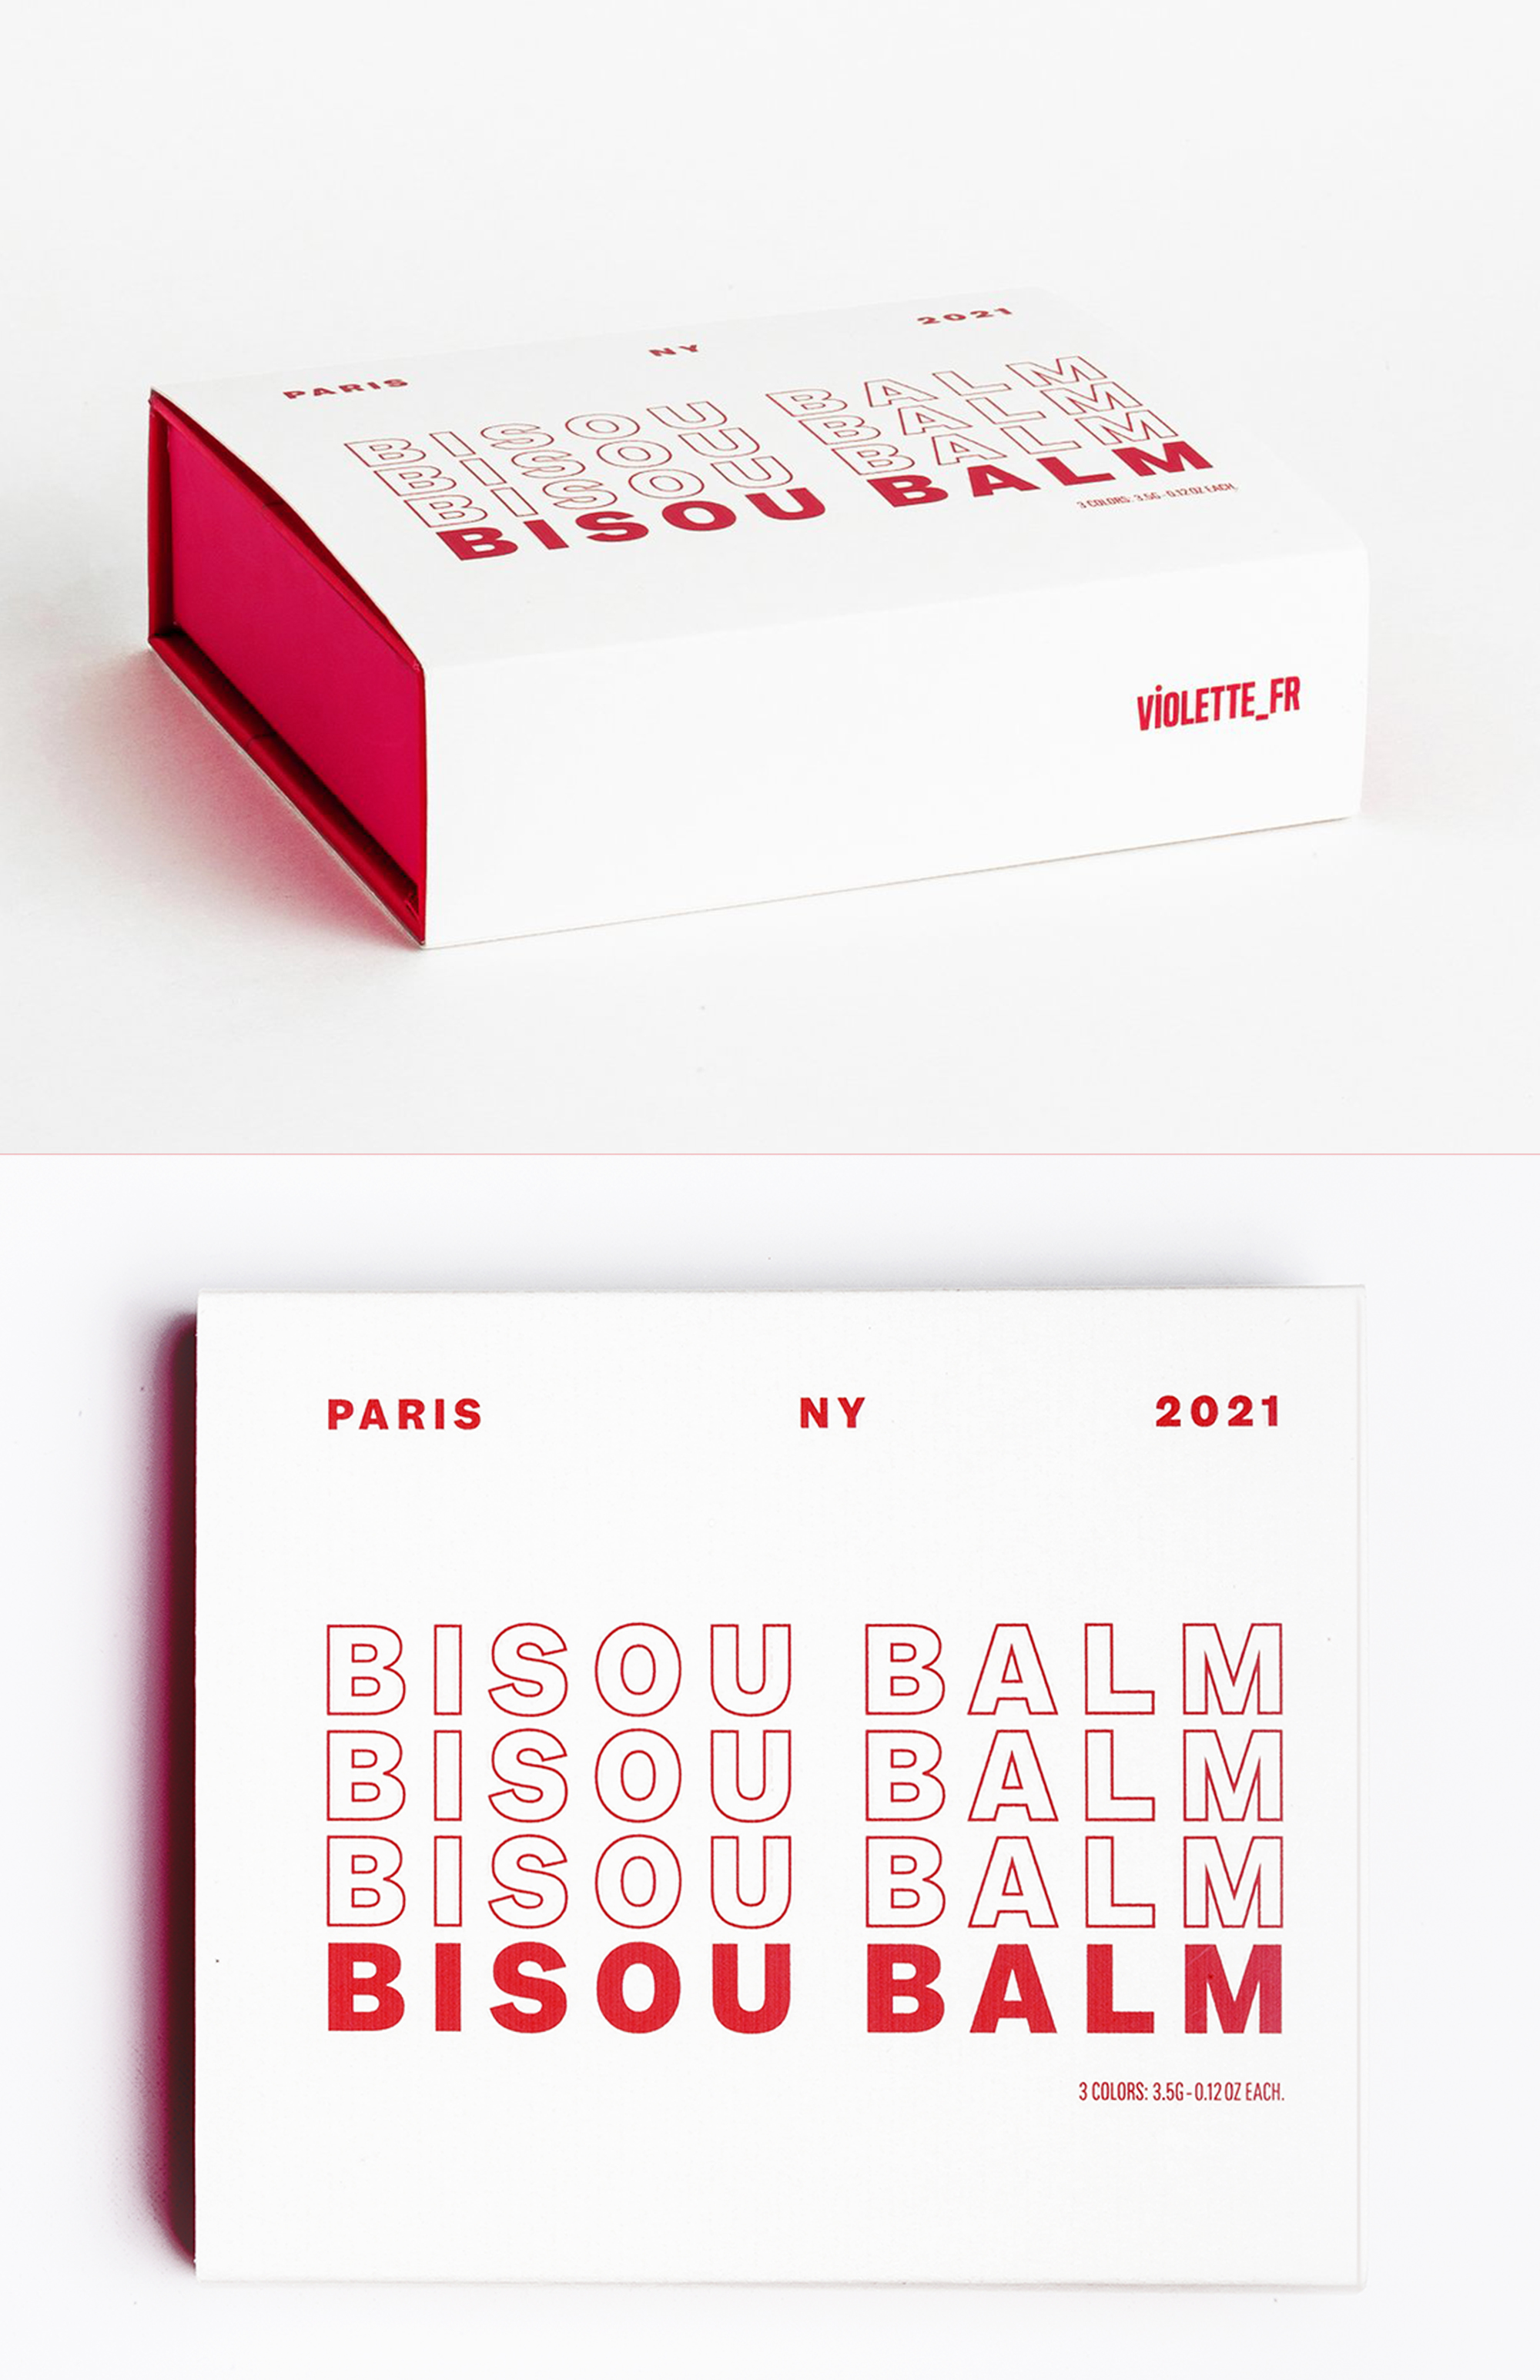 Violette_FR / Bisou Balm Packaging + Merchandising by Selected Profiles - Creative Work